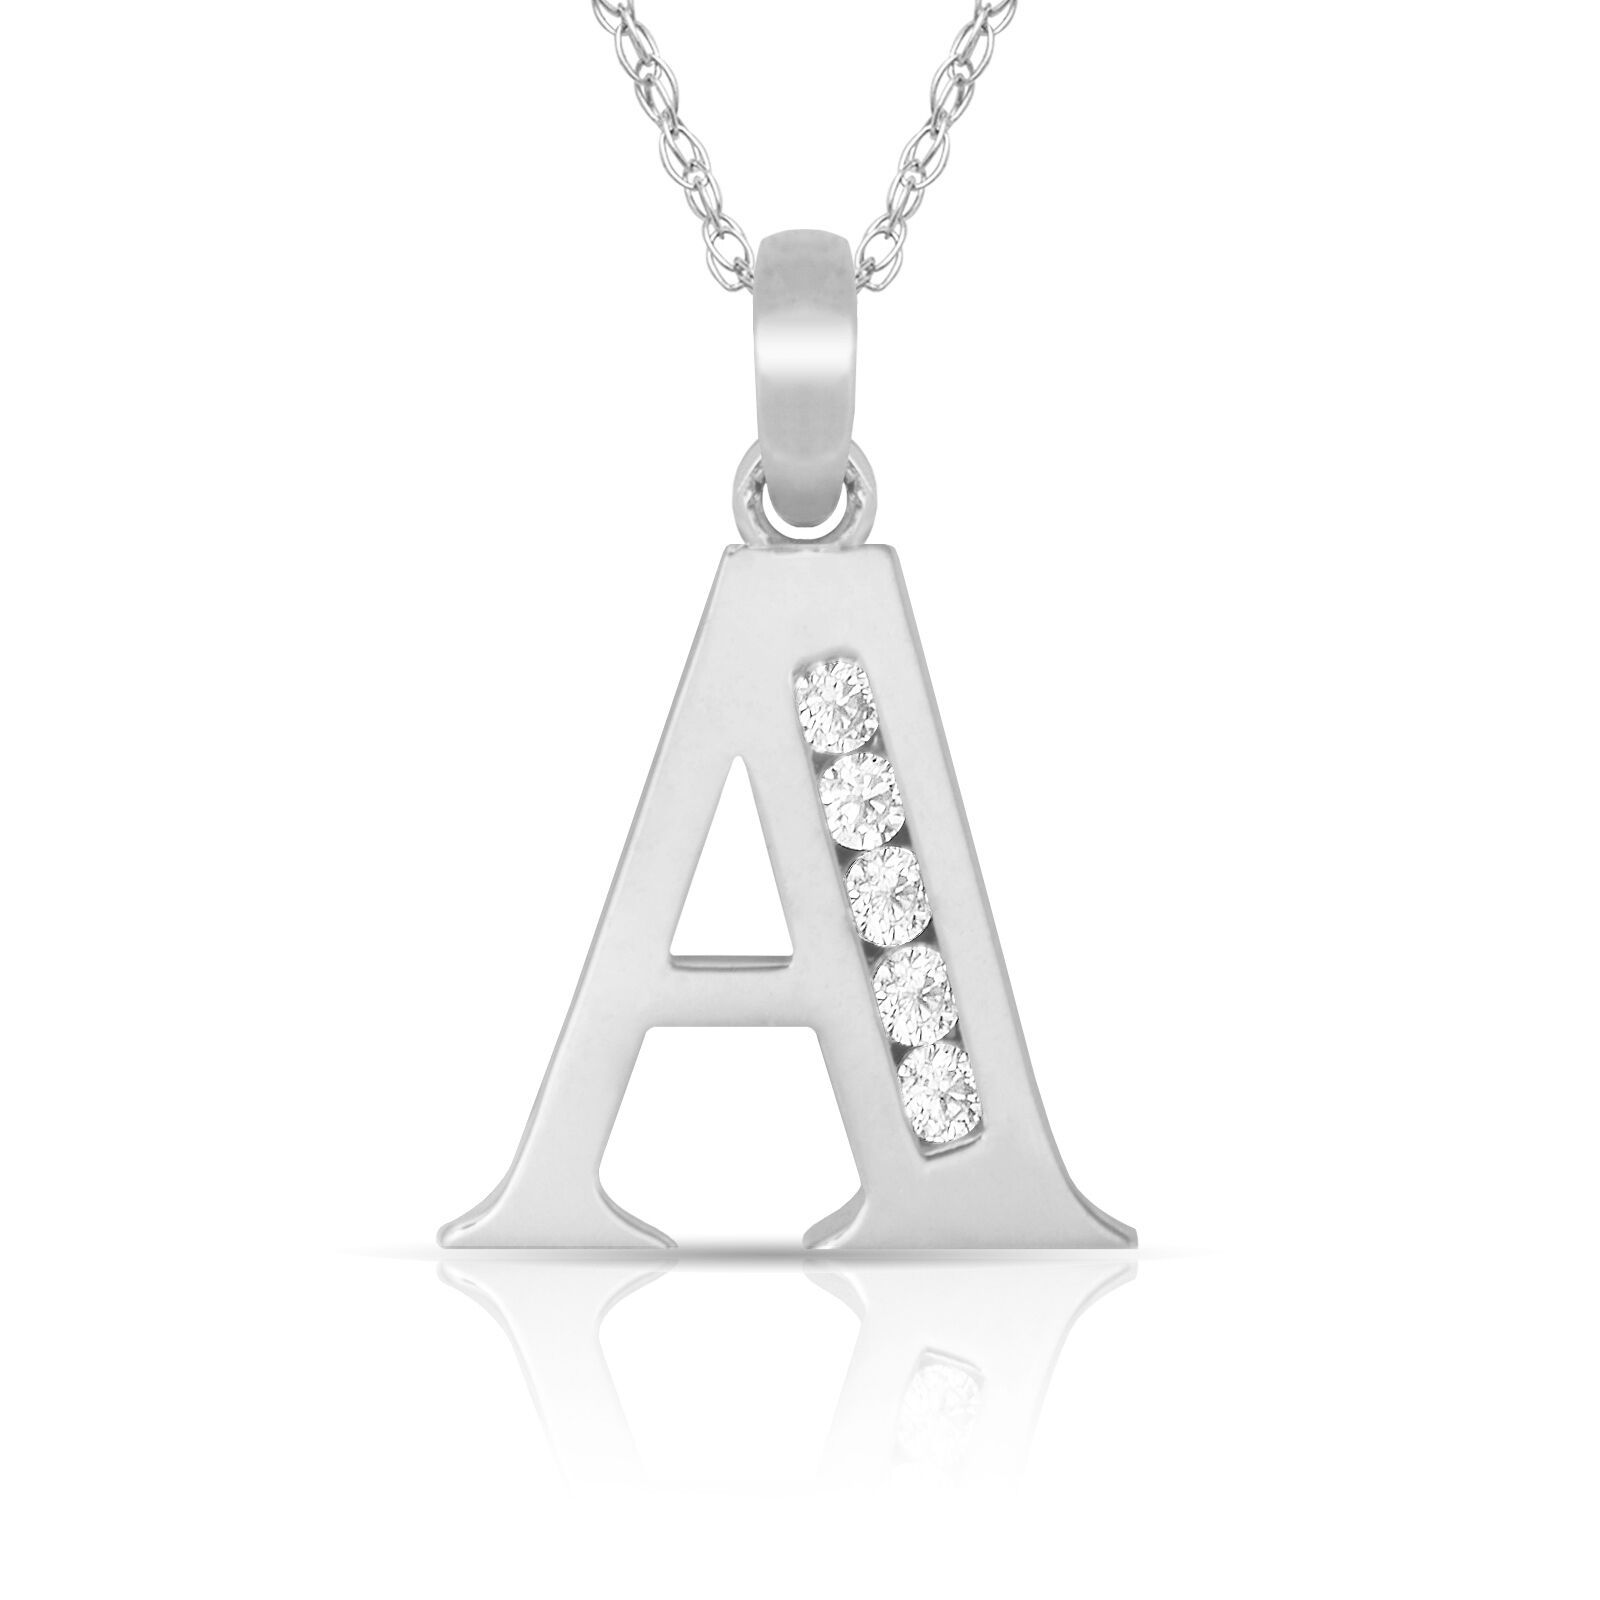 Primary image for 14K Solid White Gold Block Initial "A" Letter Charm Pendant & Necklace